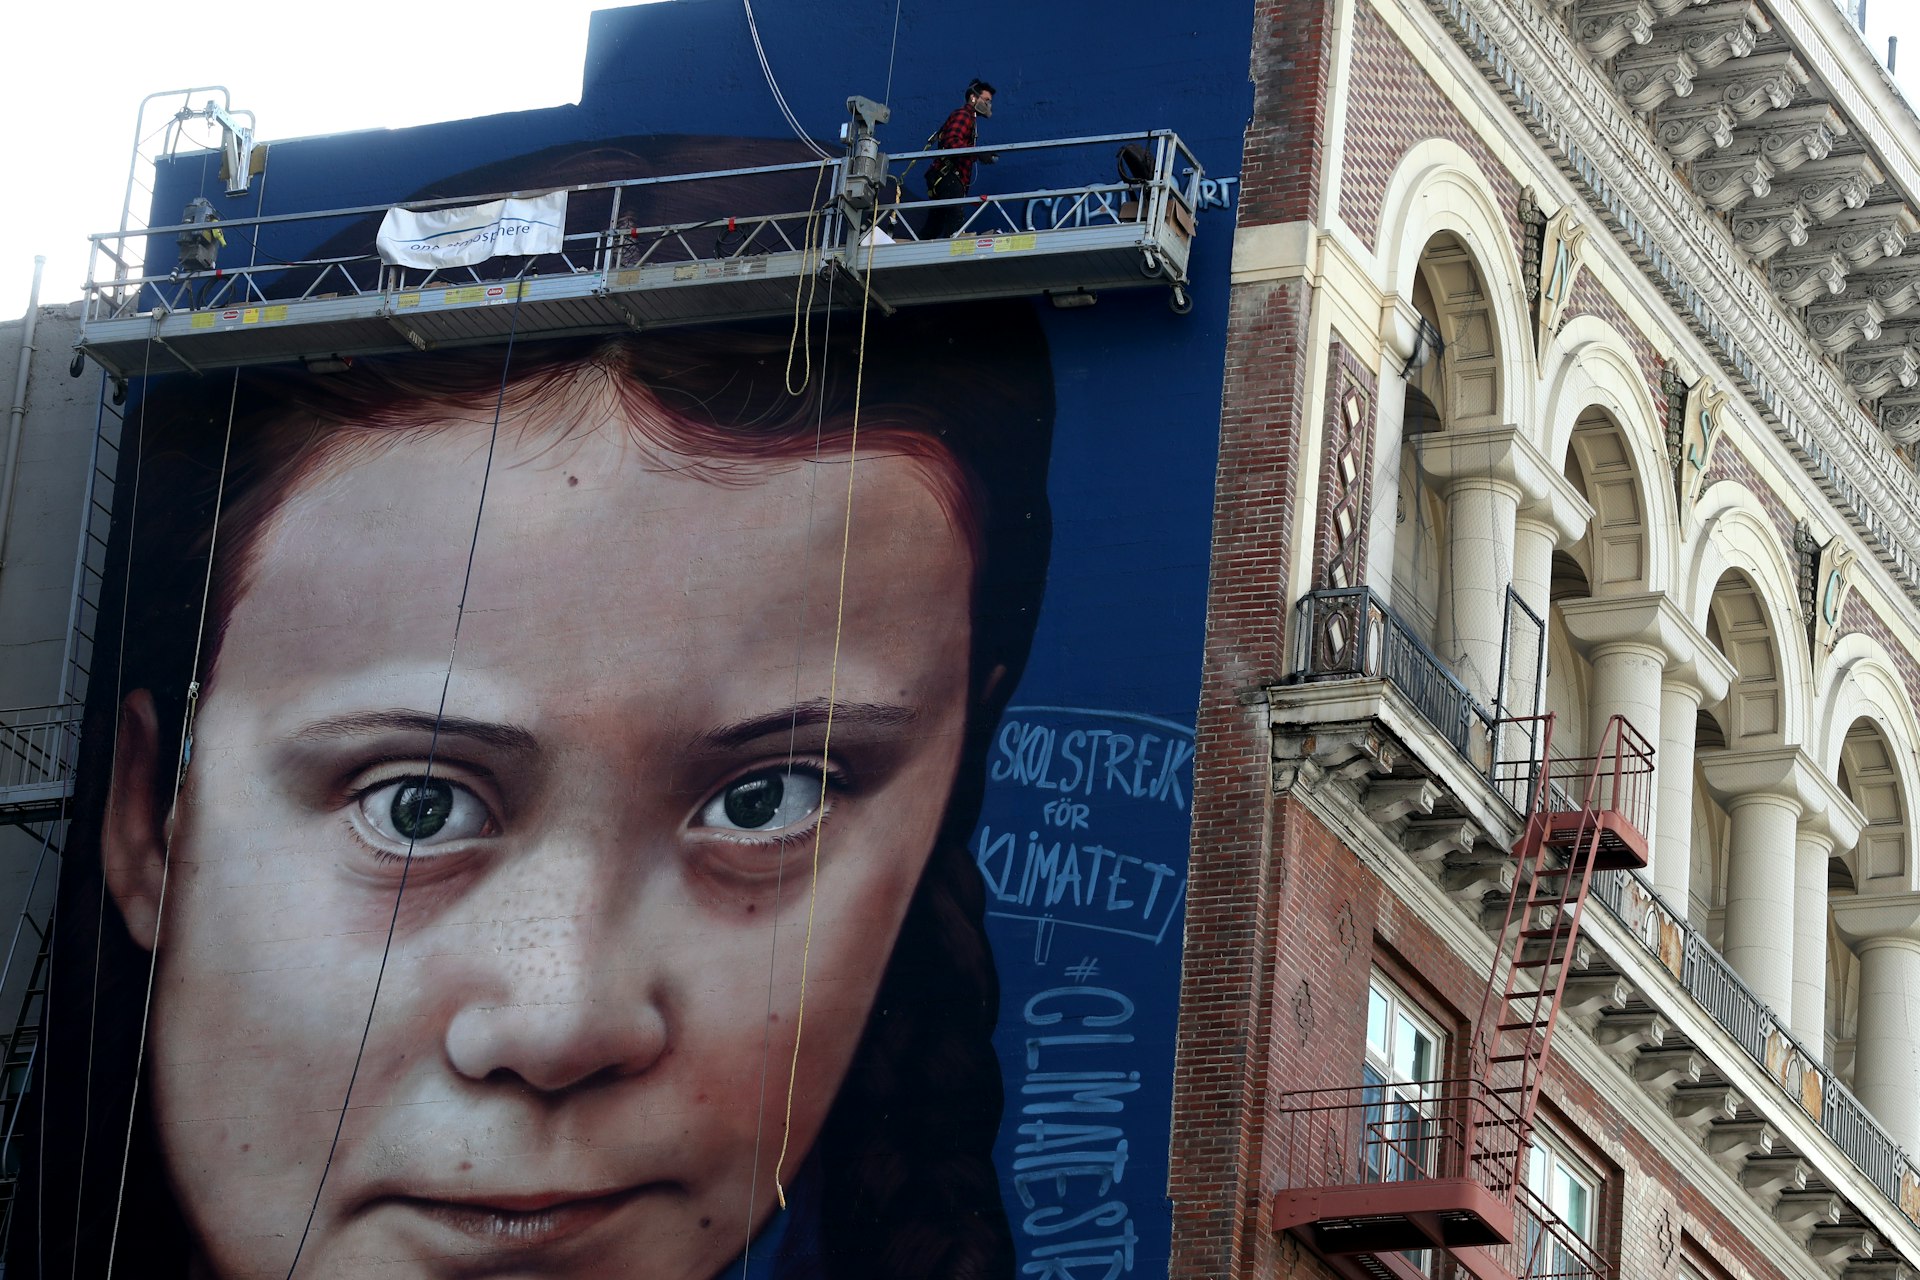 Another close up shot of the mural and Greta Thunberg's face